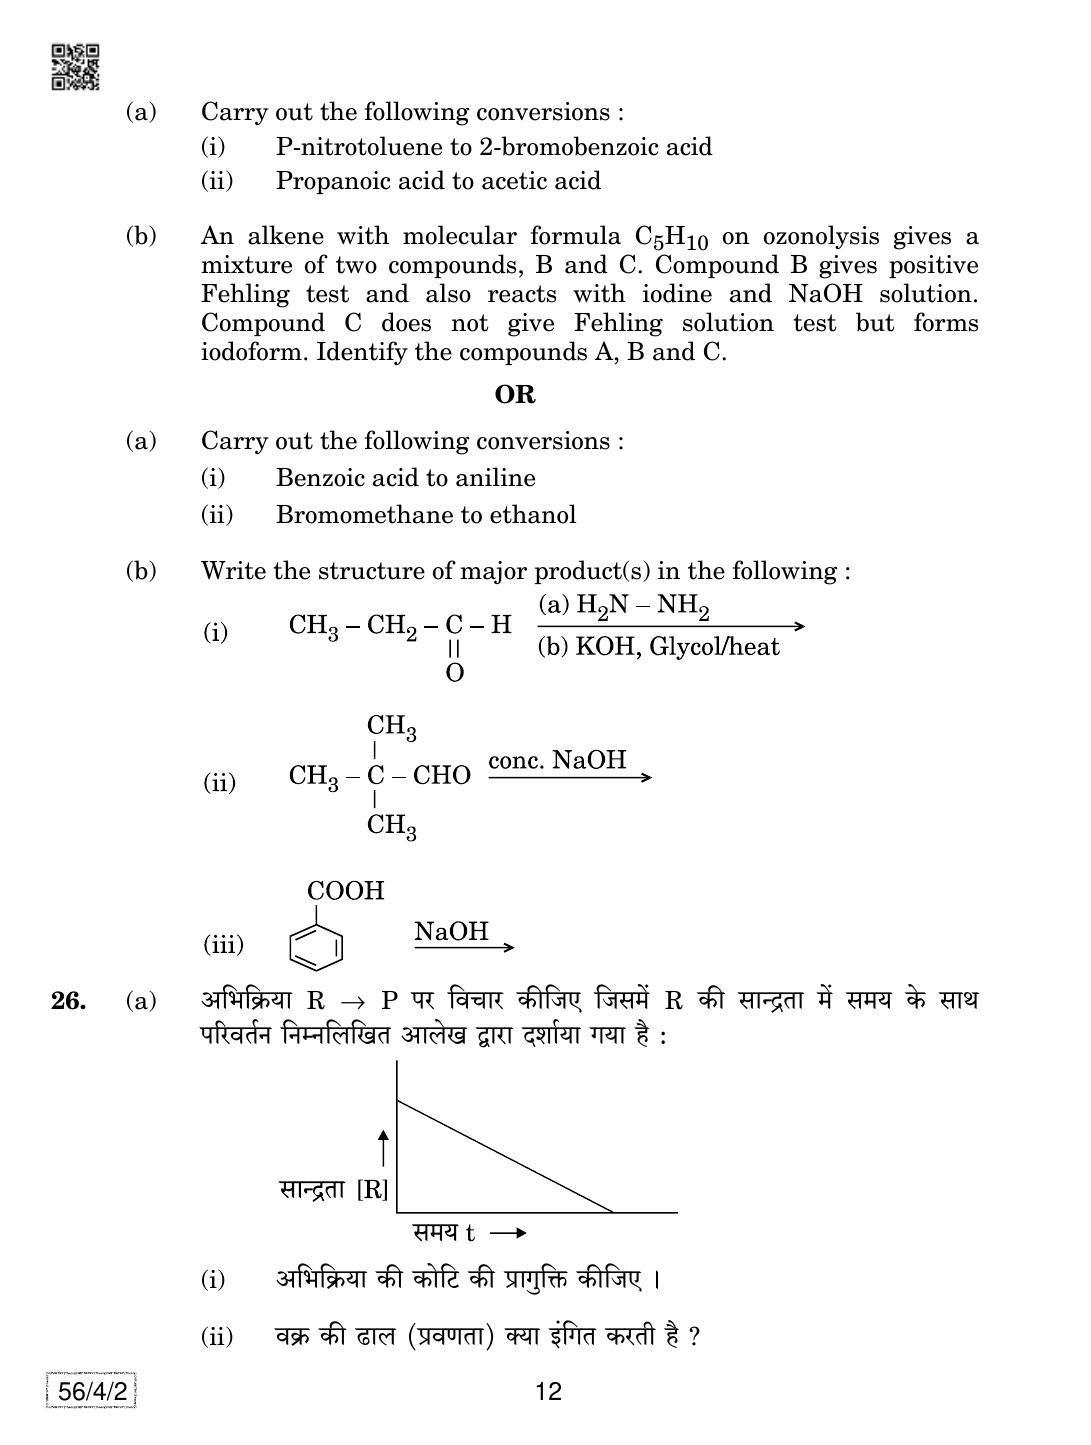 CBSE Class 12 56-4-2 Chemistry 2019 Question Paper - Page 12